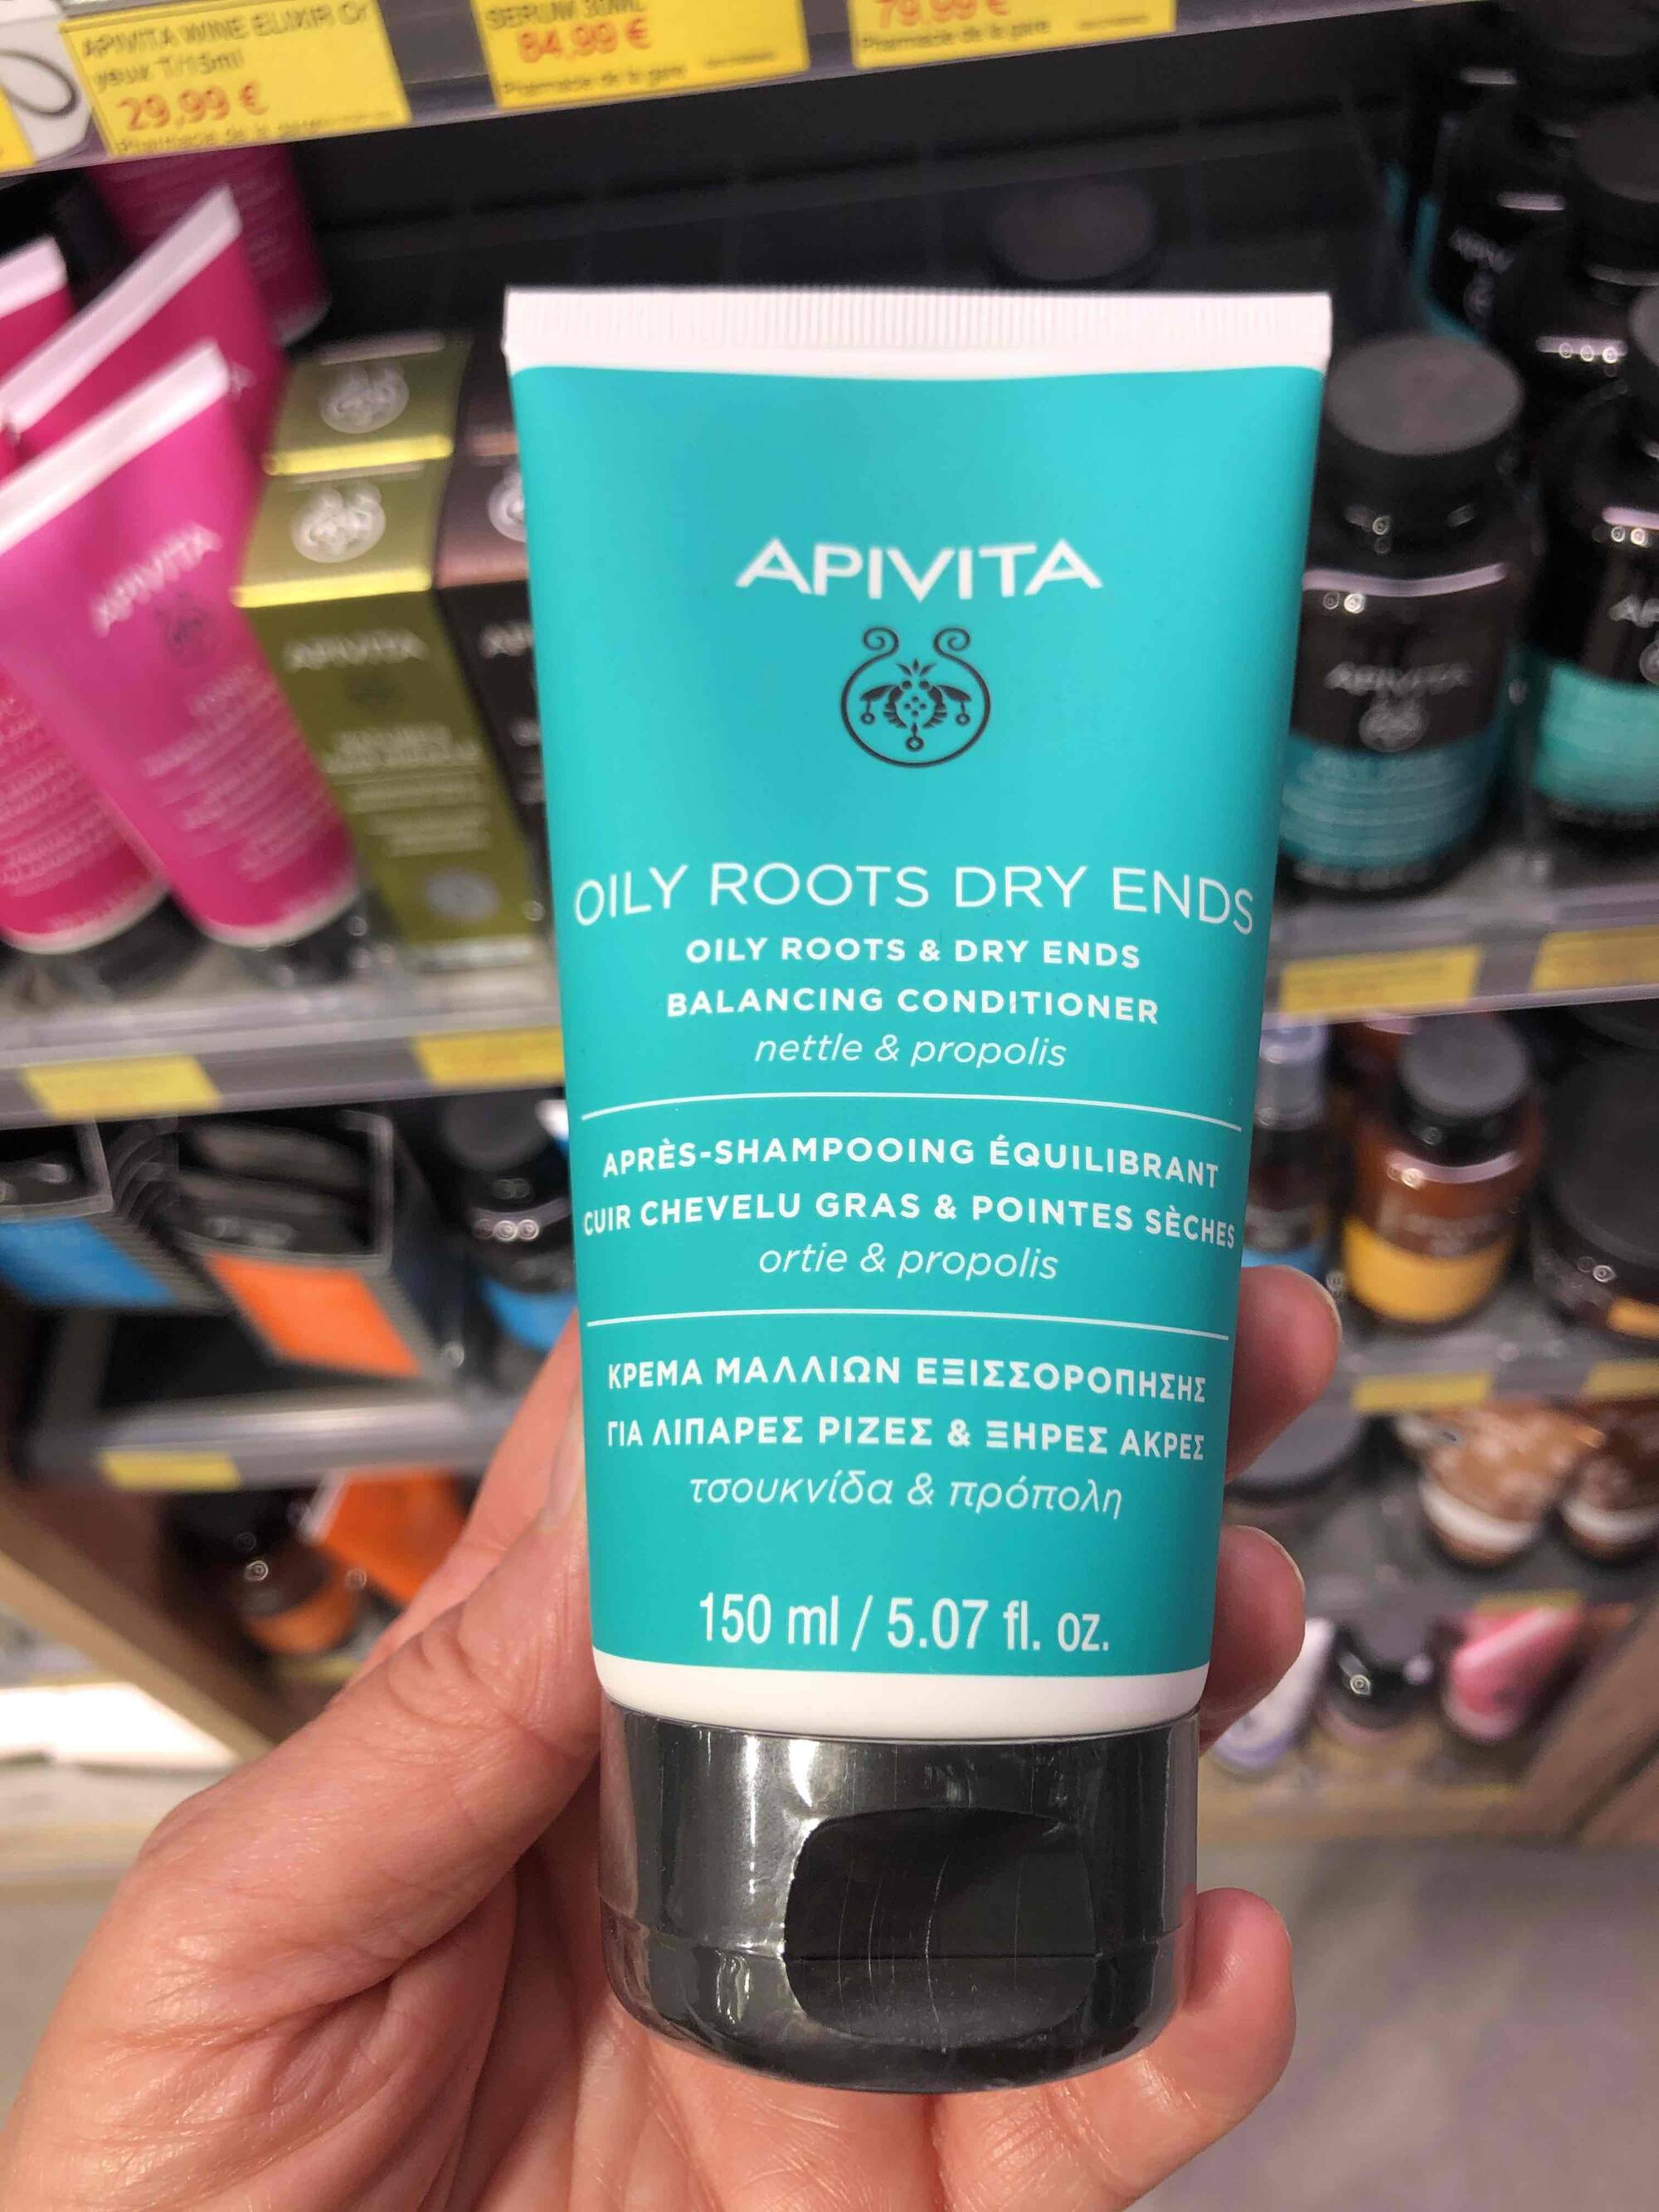 APIVITA - Oily roots dry ends - Après shampoing équilibrant